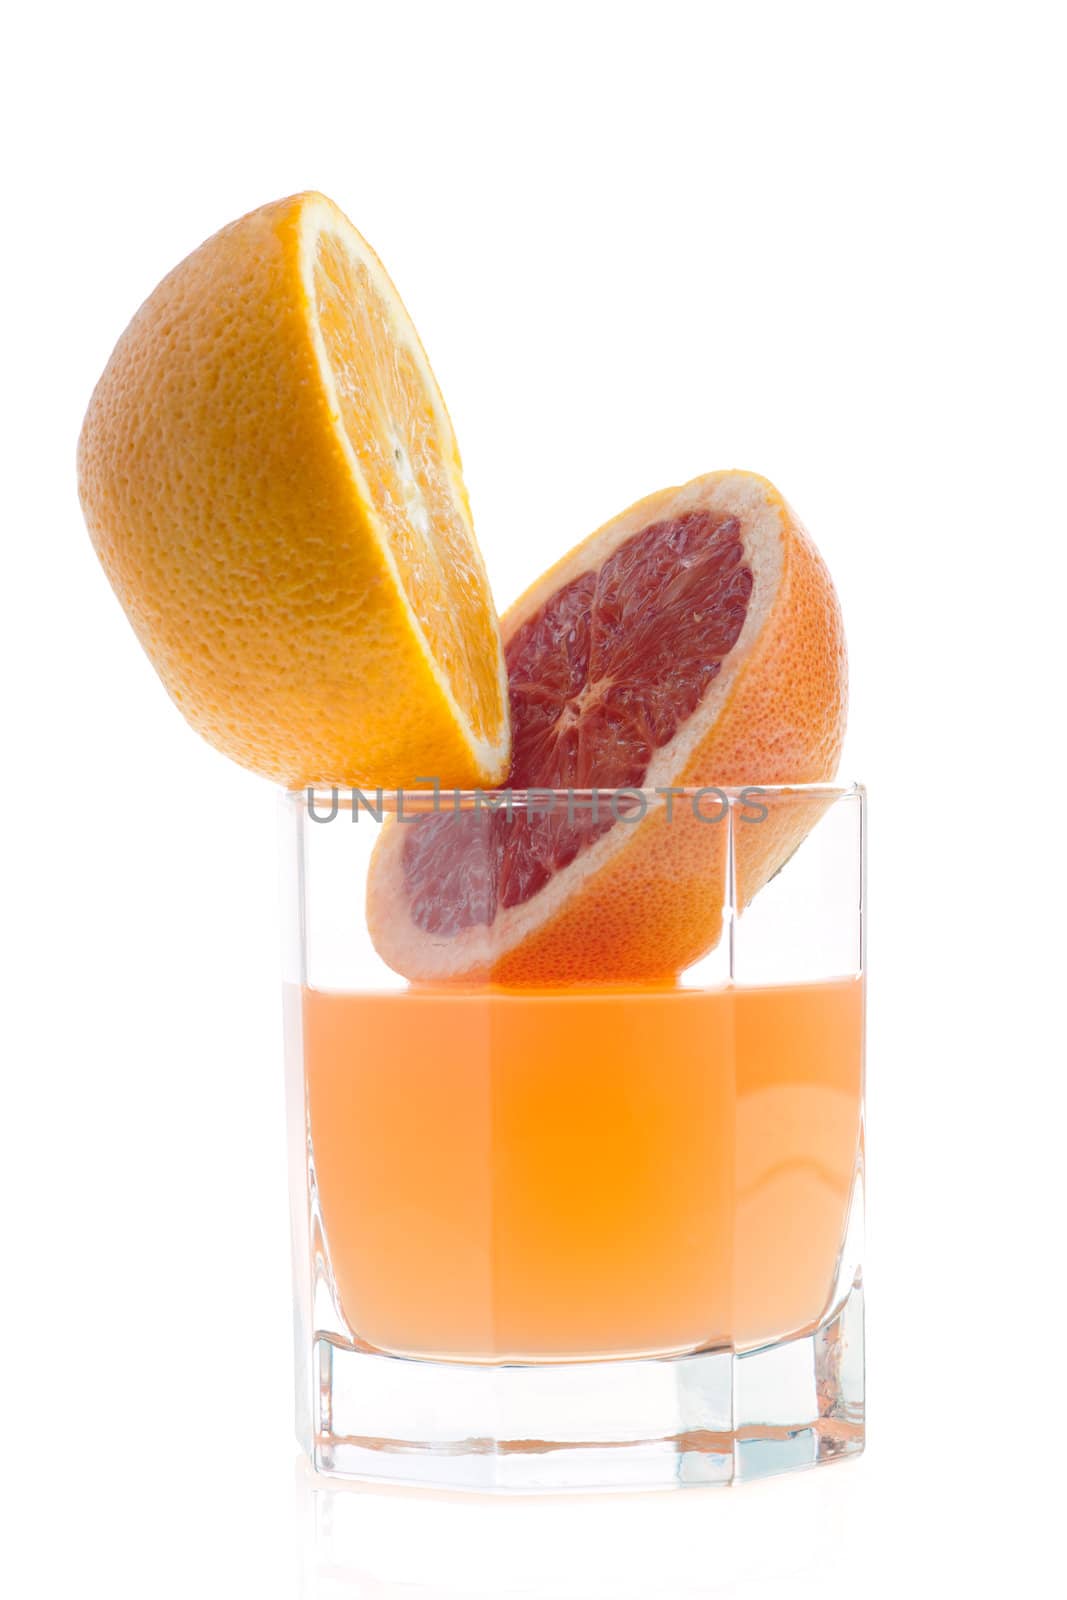 two halves of grapefruit and juice in glass on white
